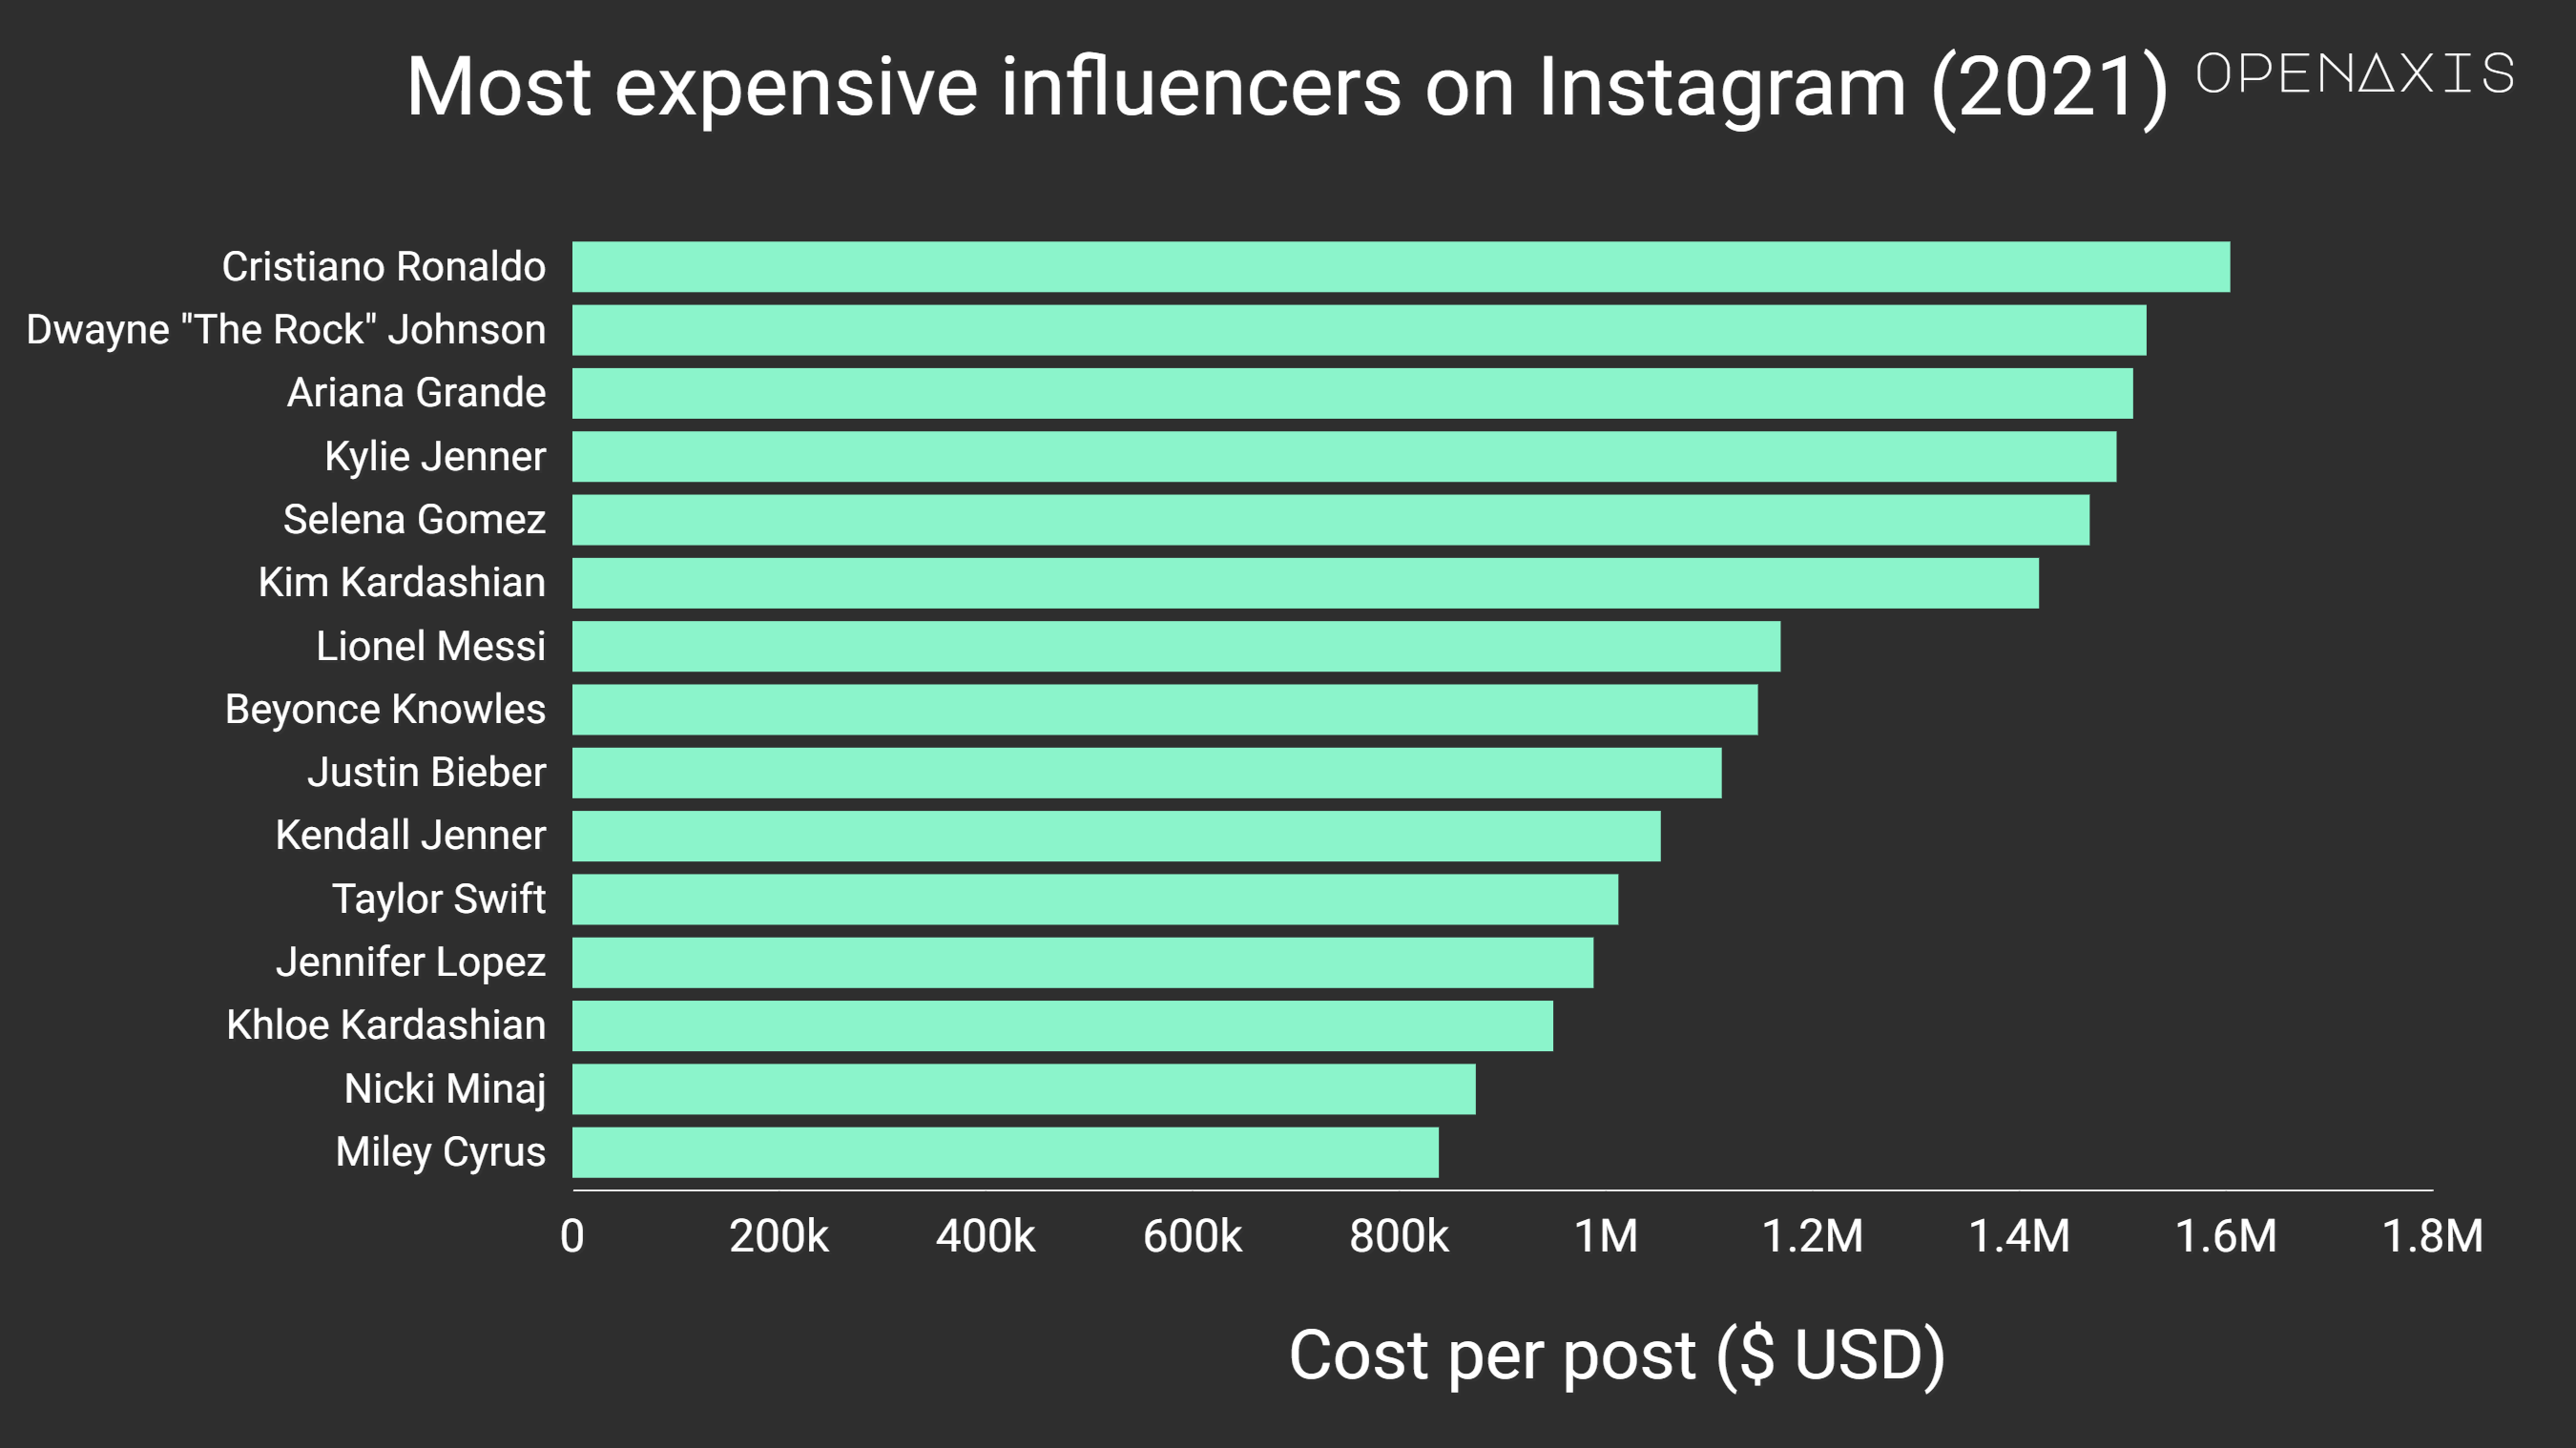 <p>Celebrities with the highest average earnings per sponsored Instagram post in 2021.</p><p><br /></p><p>According to analysis by social media marketing platform Hopper HQ, Ronaldo earns the most of any other Instagram influencer per sponsored post, raking in an average of $1.6 million every time.</p><p><br /></p><p>As the dataset shows, many celebrities are able to pull in sums north of a million when selling their influence. Actor and ex-WWE wrestler Dwayne "The Rock" Johnson can expect to earn $1.5 million for such posts, while singer Ariana Grande is the most expensive woman on the list, joining five others in the top ten.</p><p><br /></p><p><span data-index="0" data-denotation-char data-id="0" data-value="&lt;a href=&quot;/search?q=%23socialmedia&quot; target=_self&gt;#socialmedia" data-link="/search?q=%23socialmedia">﻿<span contenteditable="false"><span></span><a href="/search?q=%23socialmedia" target="_self">#socialmedia</a></span>﻿</span> <span data-index="0" data-denotation-char data-id="0" data-value="&lt;a href=&quot;/search?q=%23influencer&quot; target=_self&gt;#influencer" data-link="/search?q=%23influencer">﻿<span contenteditable="false"><span></span><a href="/search?q=%23influencer" target="_self">#influencer</a></span>﻿</span> <span data-index="0" data-denotation-char data-id="0" data-value="&lt;a href=&quot;/search?q=%23marketing&quot; target=_self&gt;#marketing" data-link="/search?q=%23marketing">﻿<span contenteditable="false"><span></span><a href="/search?q=%23marketing" target="_self">#marketing</a></span>﻿</span> <span data-index="0" data-denotation-char data-id="0" data-value="&lt;a href=&quot;/search?q=%23paidmedia&quot; target=_self&gt;#paidmedia" data-link="/search?q=%23paidmedia">﻿<span contenteditable="false"><span></span><a href="/search?q=%23paidmedia" target="_self">#paidmedia</a></span>﻿</span></p><p><br /></p><p>Source: <a href="/data/3799" target="_blank">Hopper HQ</a></p><p><br /></p>